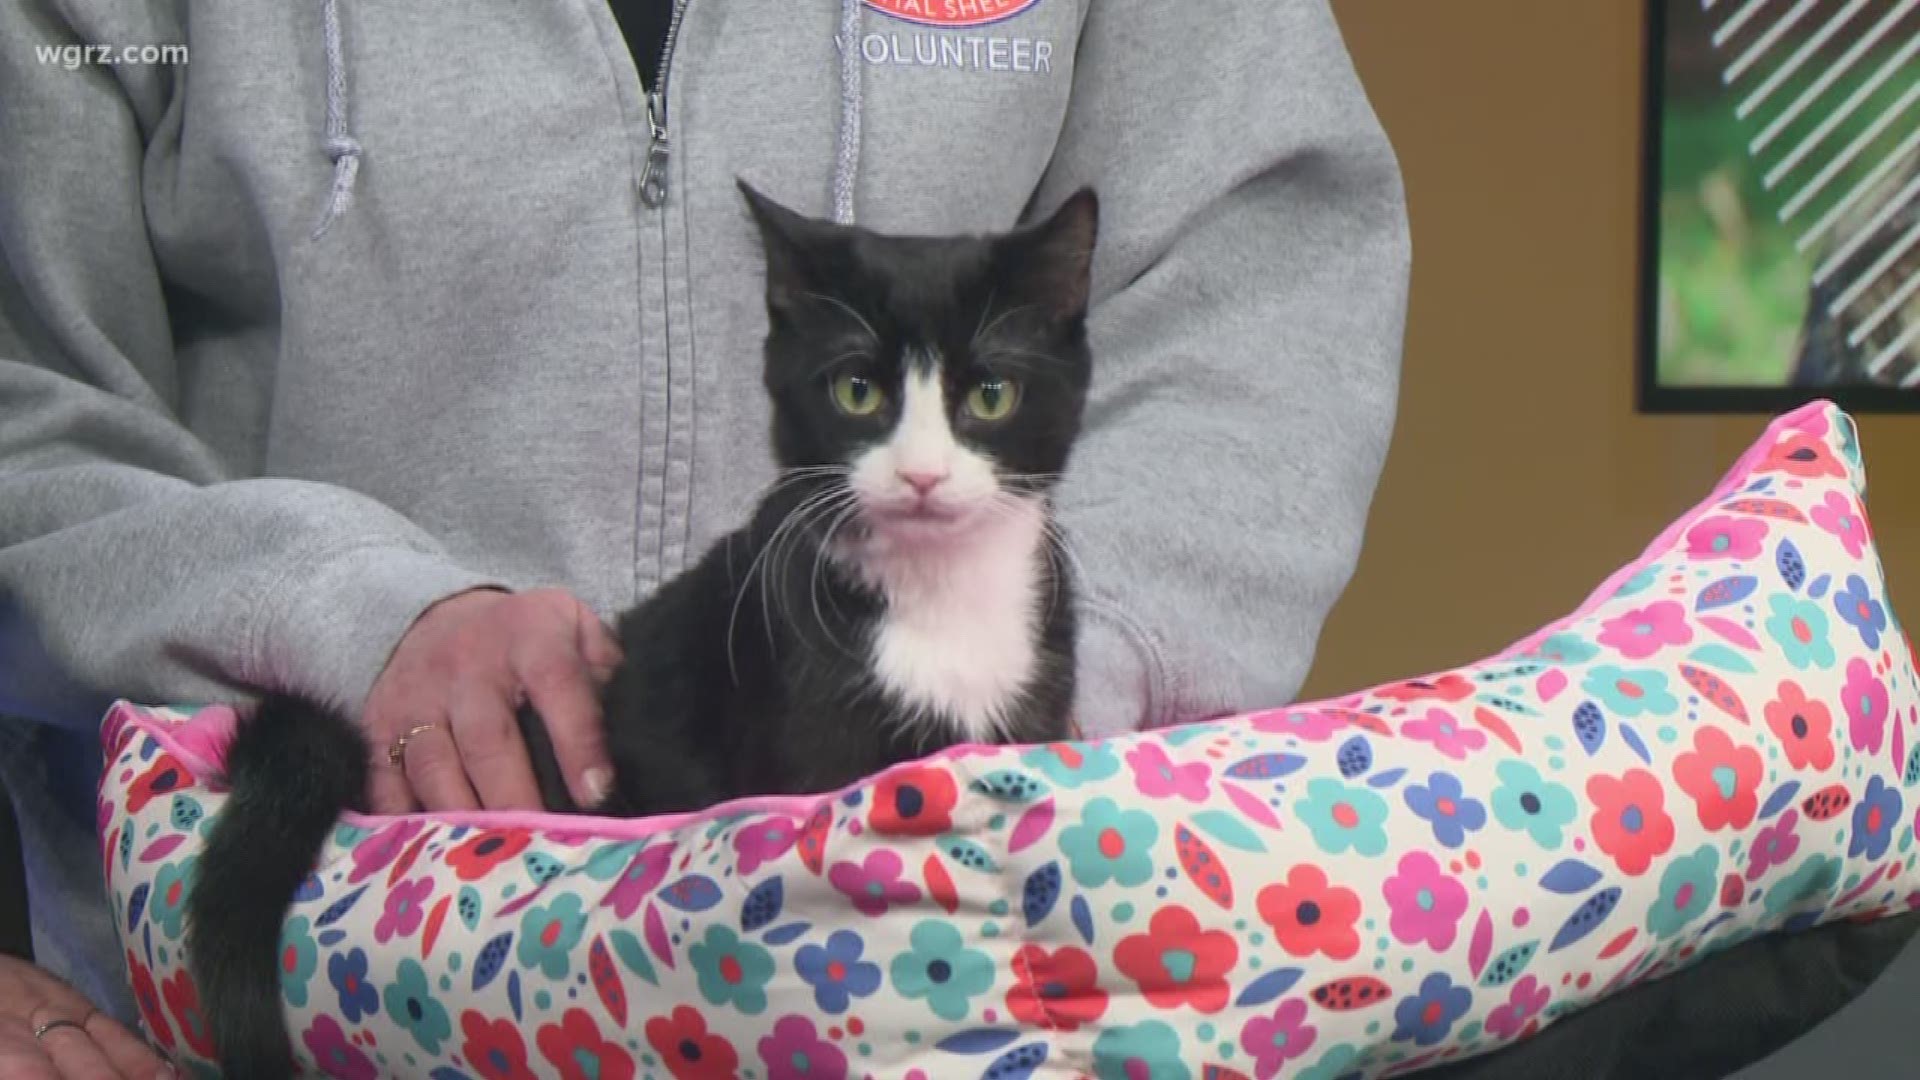 Freddie Mercury is 6 months old, and he's up for adoption from the Buffalo Animal Shelter.